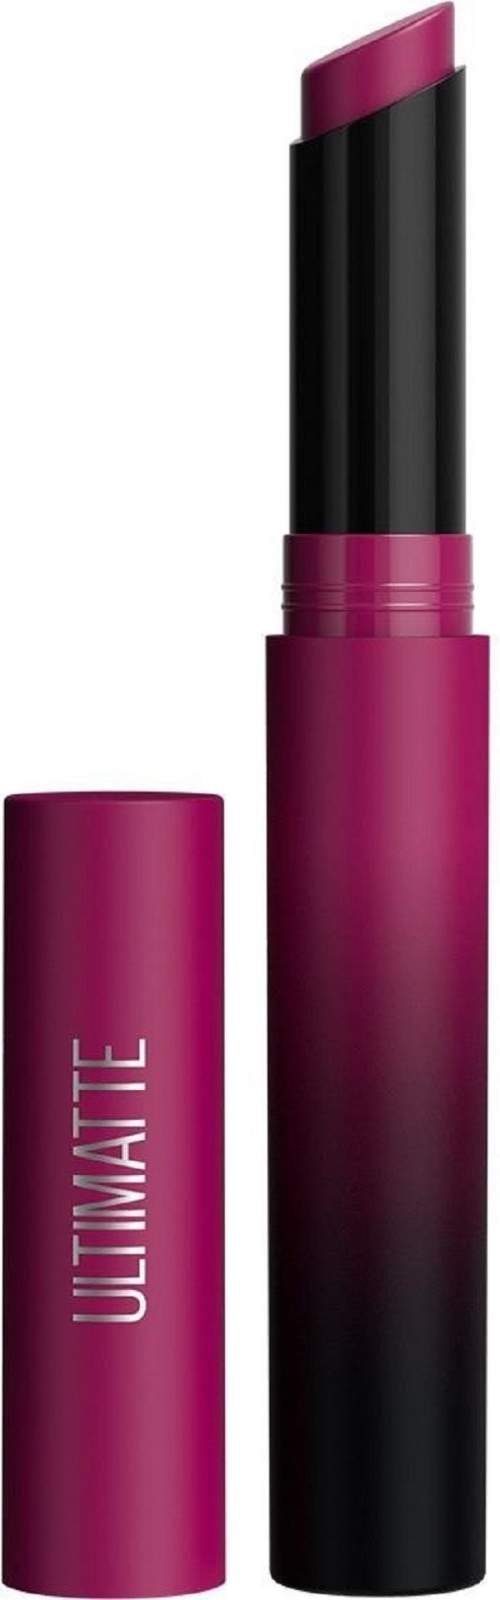 Maybelline - Color Sensational , 2ml, 099, More, Berry